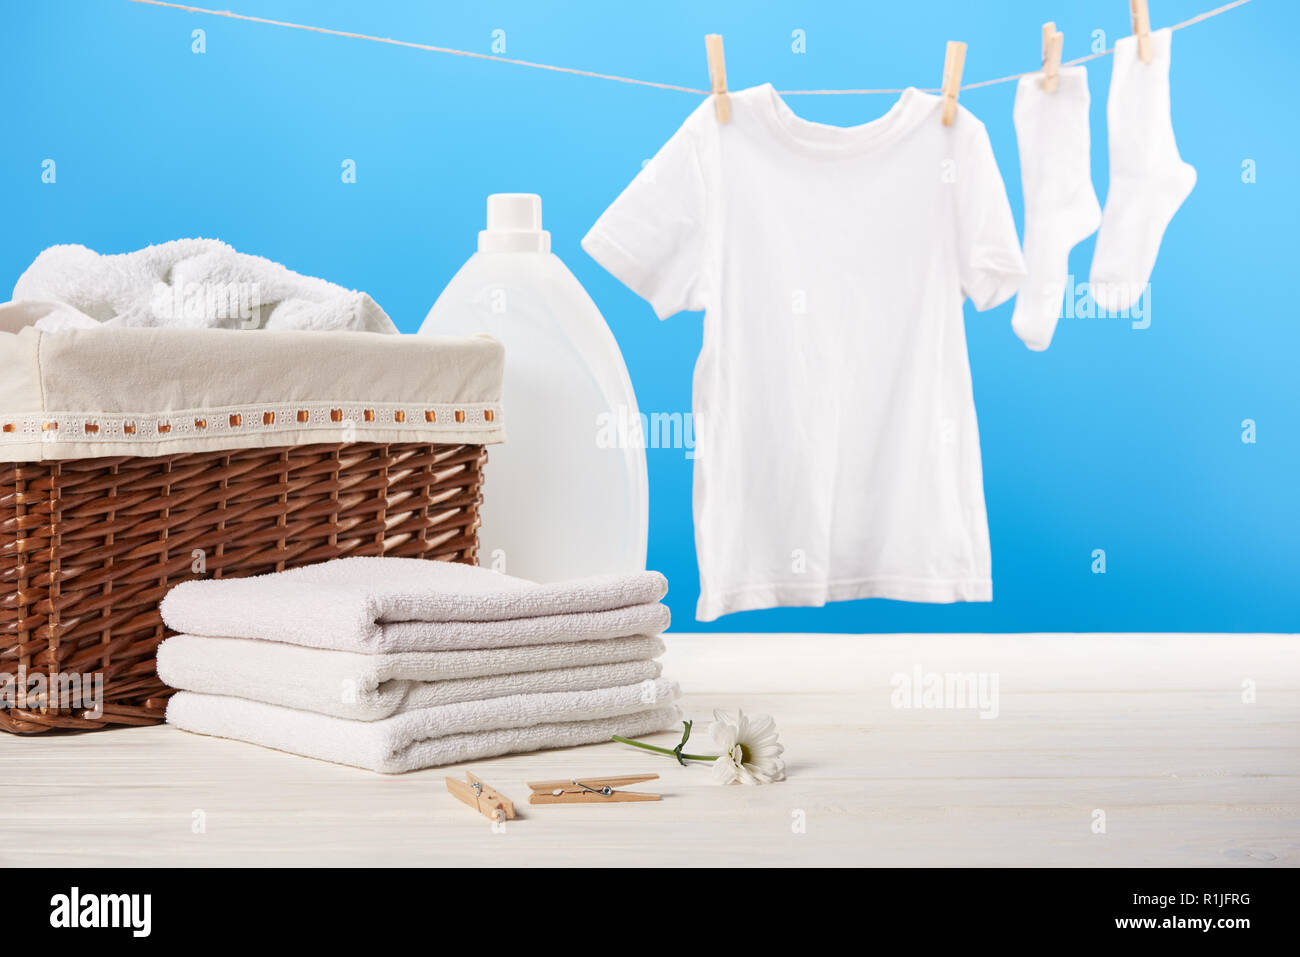 Fresh Clean White Towels Drying On Washing Line In Outdoor Stock Photo,  Picture and Royalty Free Image. Image 47888537.